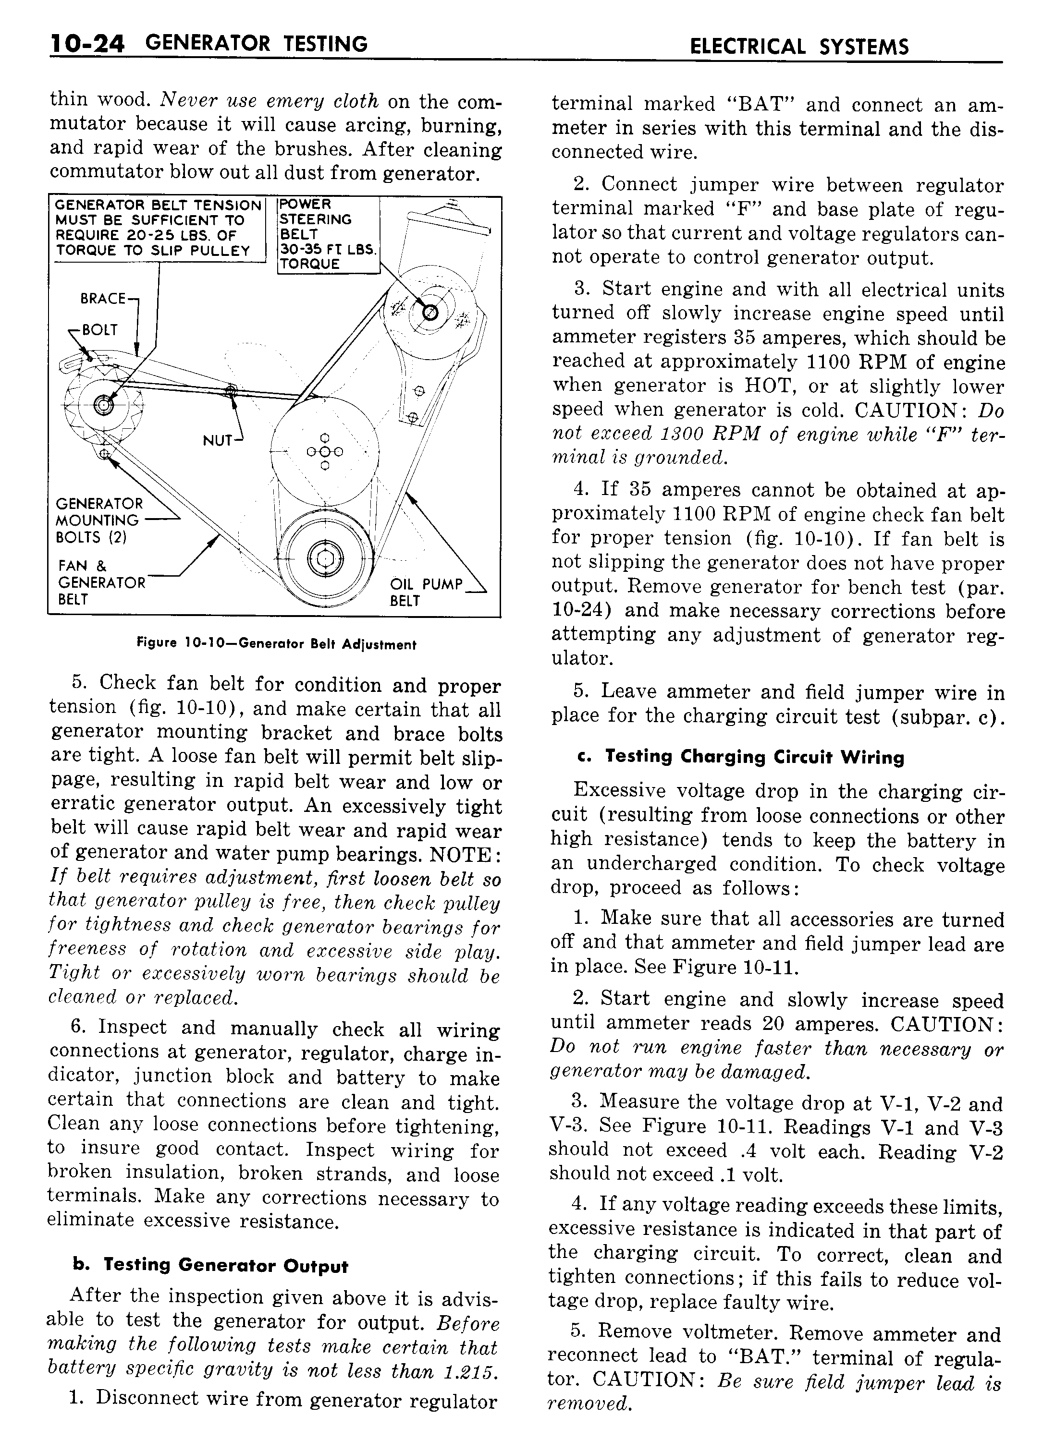 n_11 1957 Buick Shop Manual - Electrical Systems-024-024.jpg